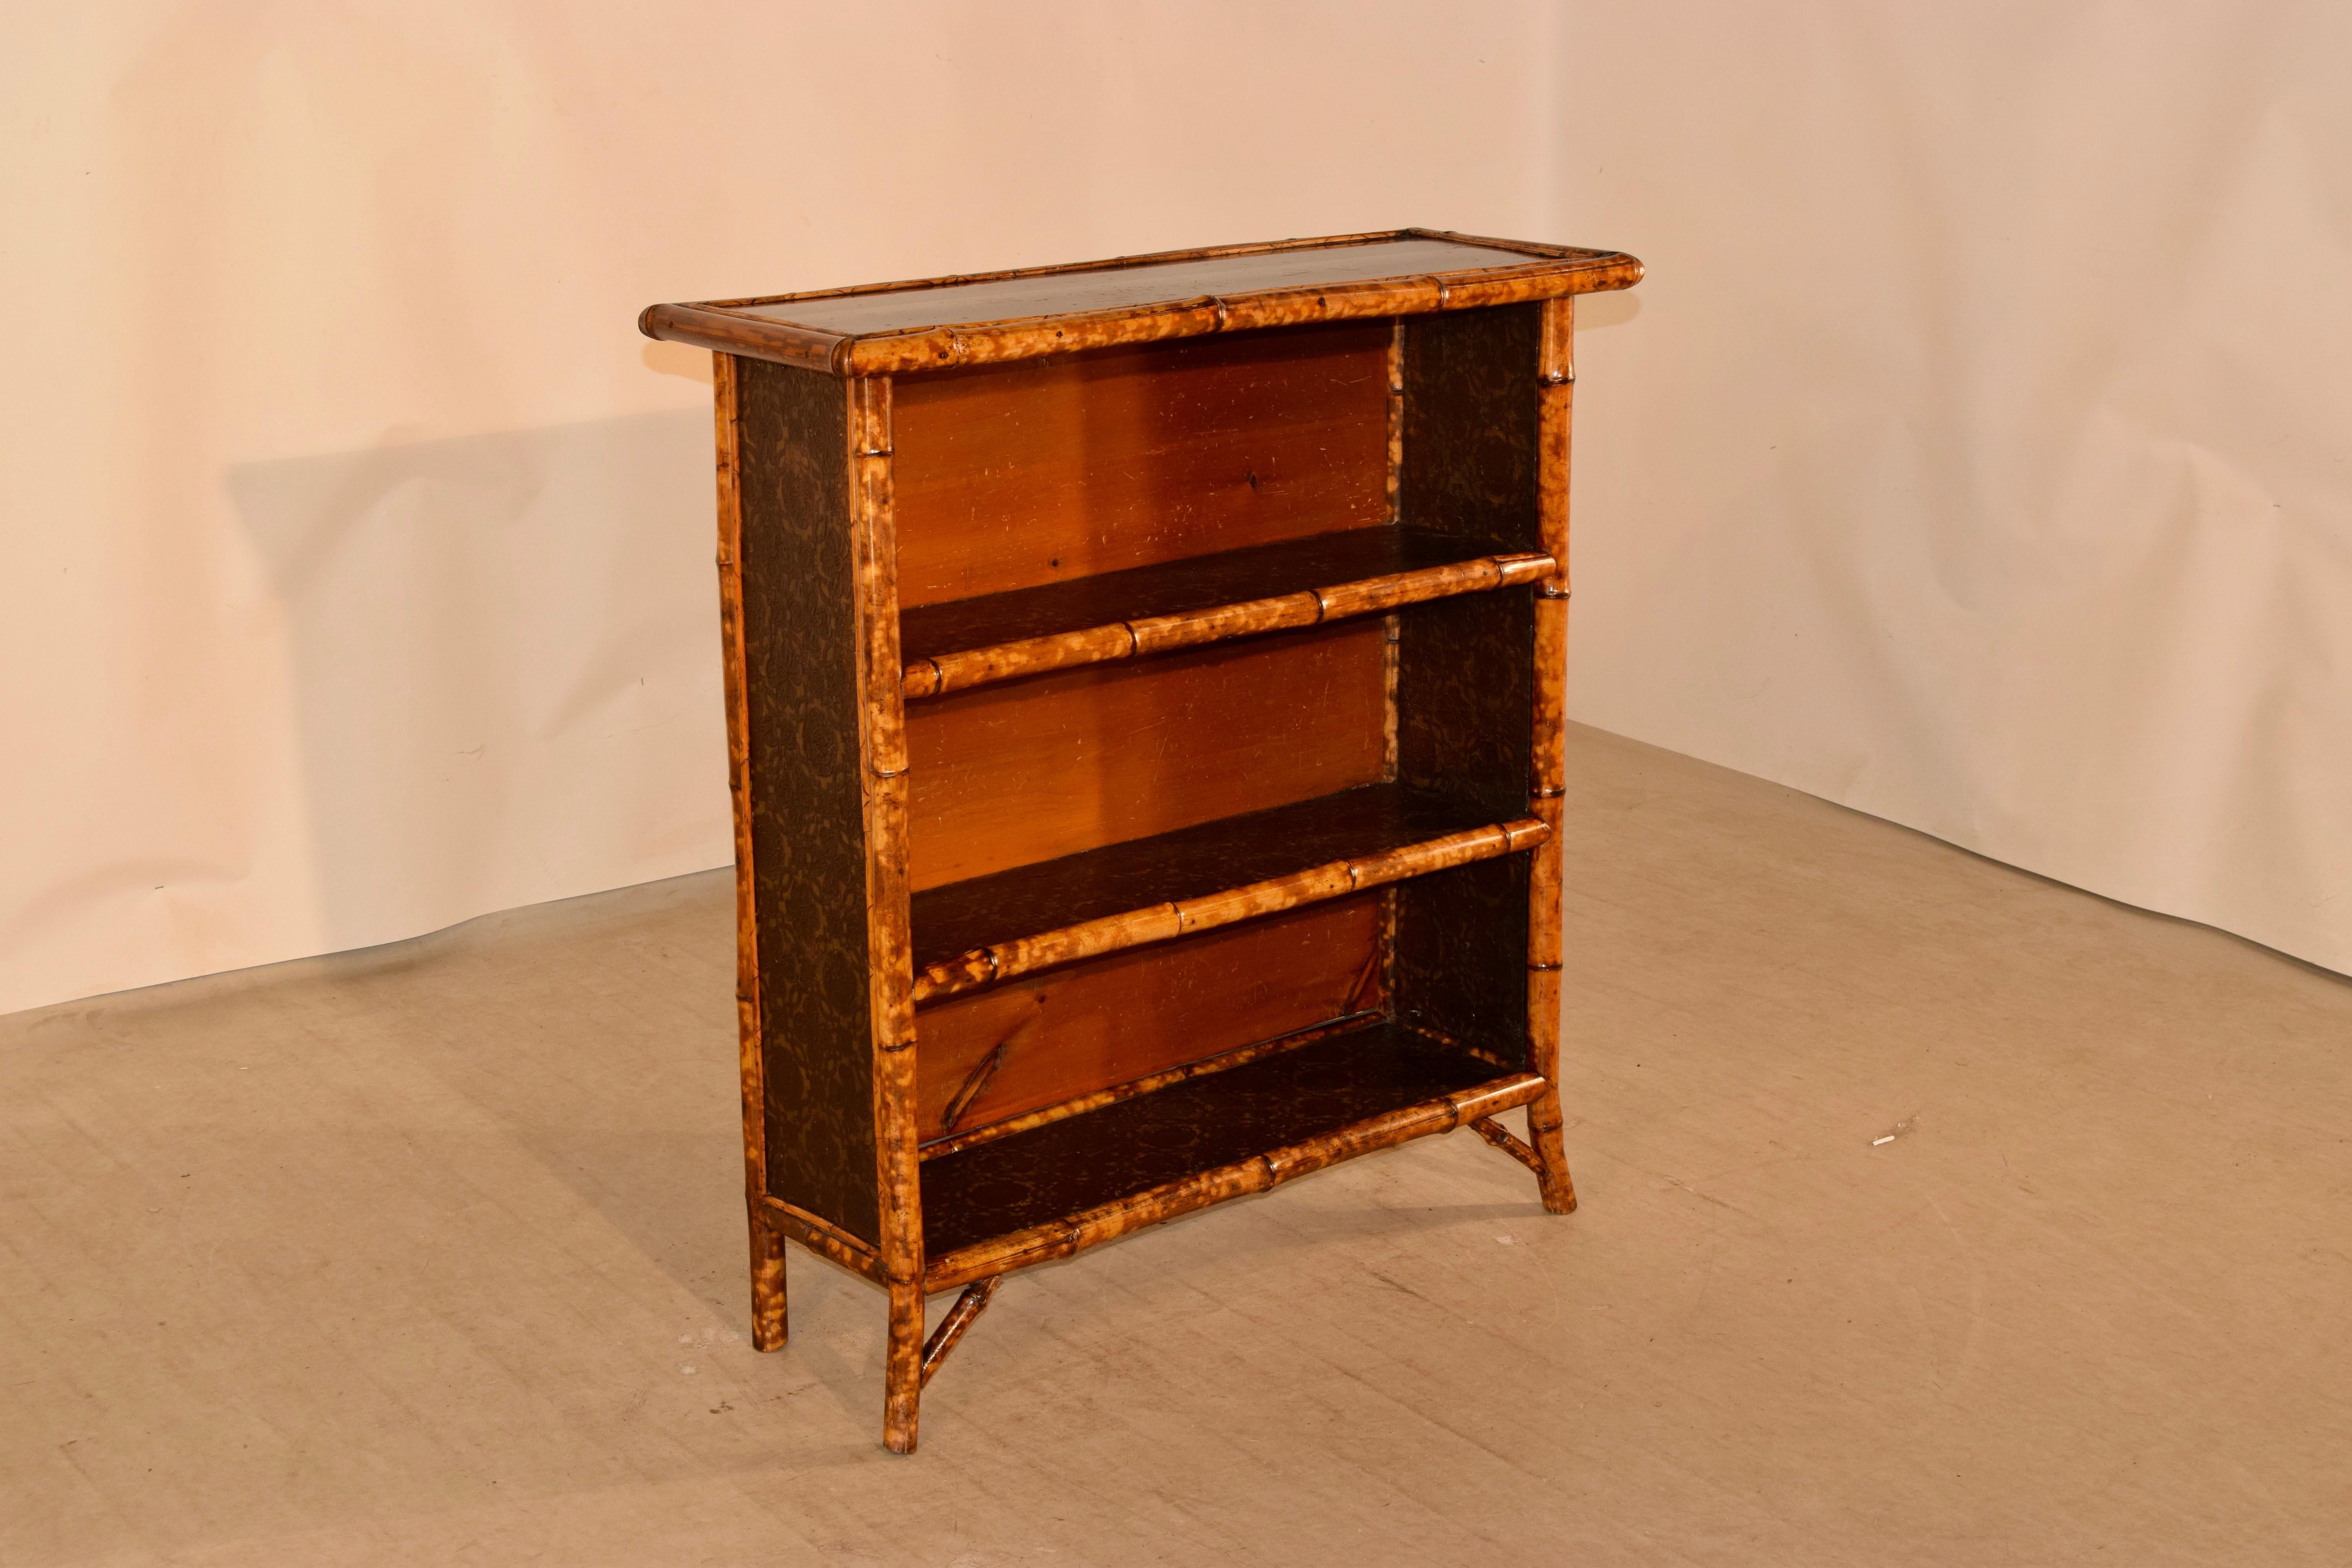 19th century bamboo bookcase from France with a chinoiserie top and three shelves, all which are covered in hand painted wallpaper, along with the sides. The case has a wooden back, and the case is raised on bamboo legs.